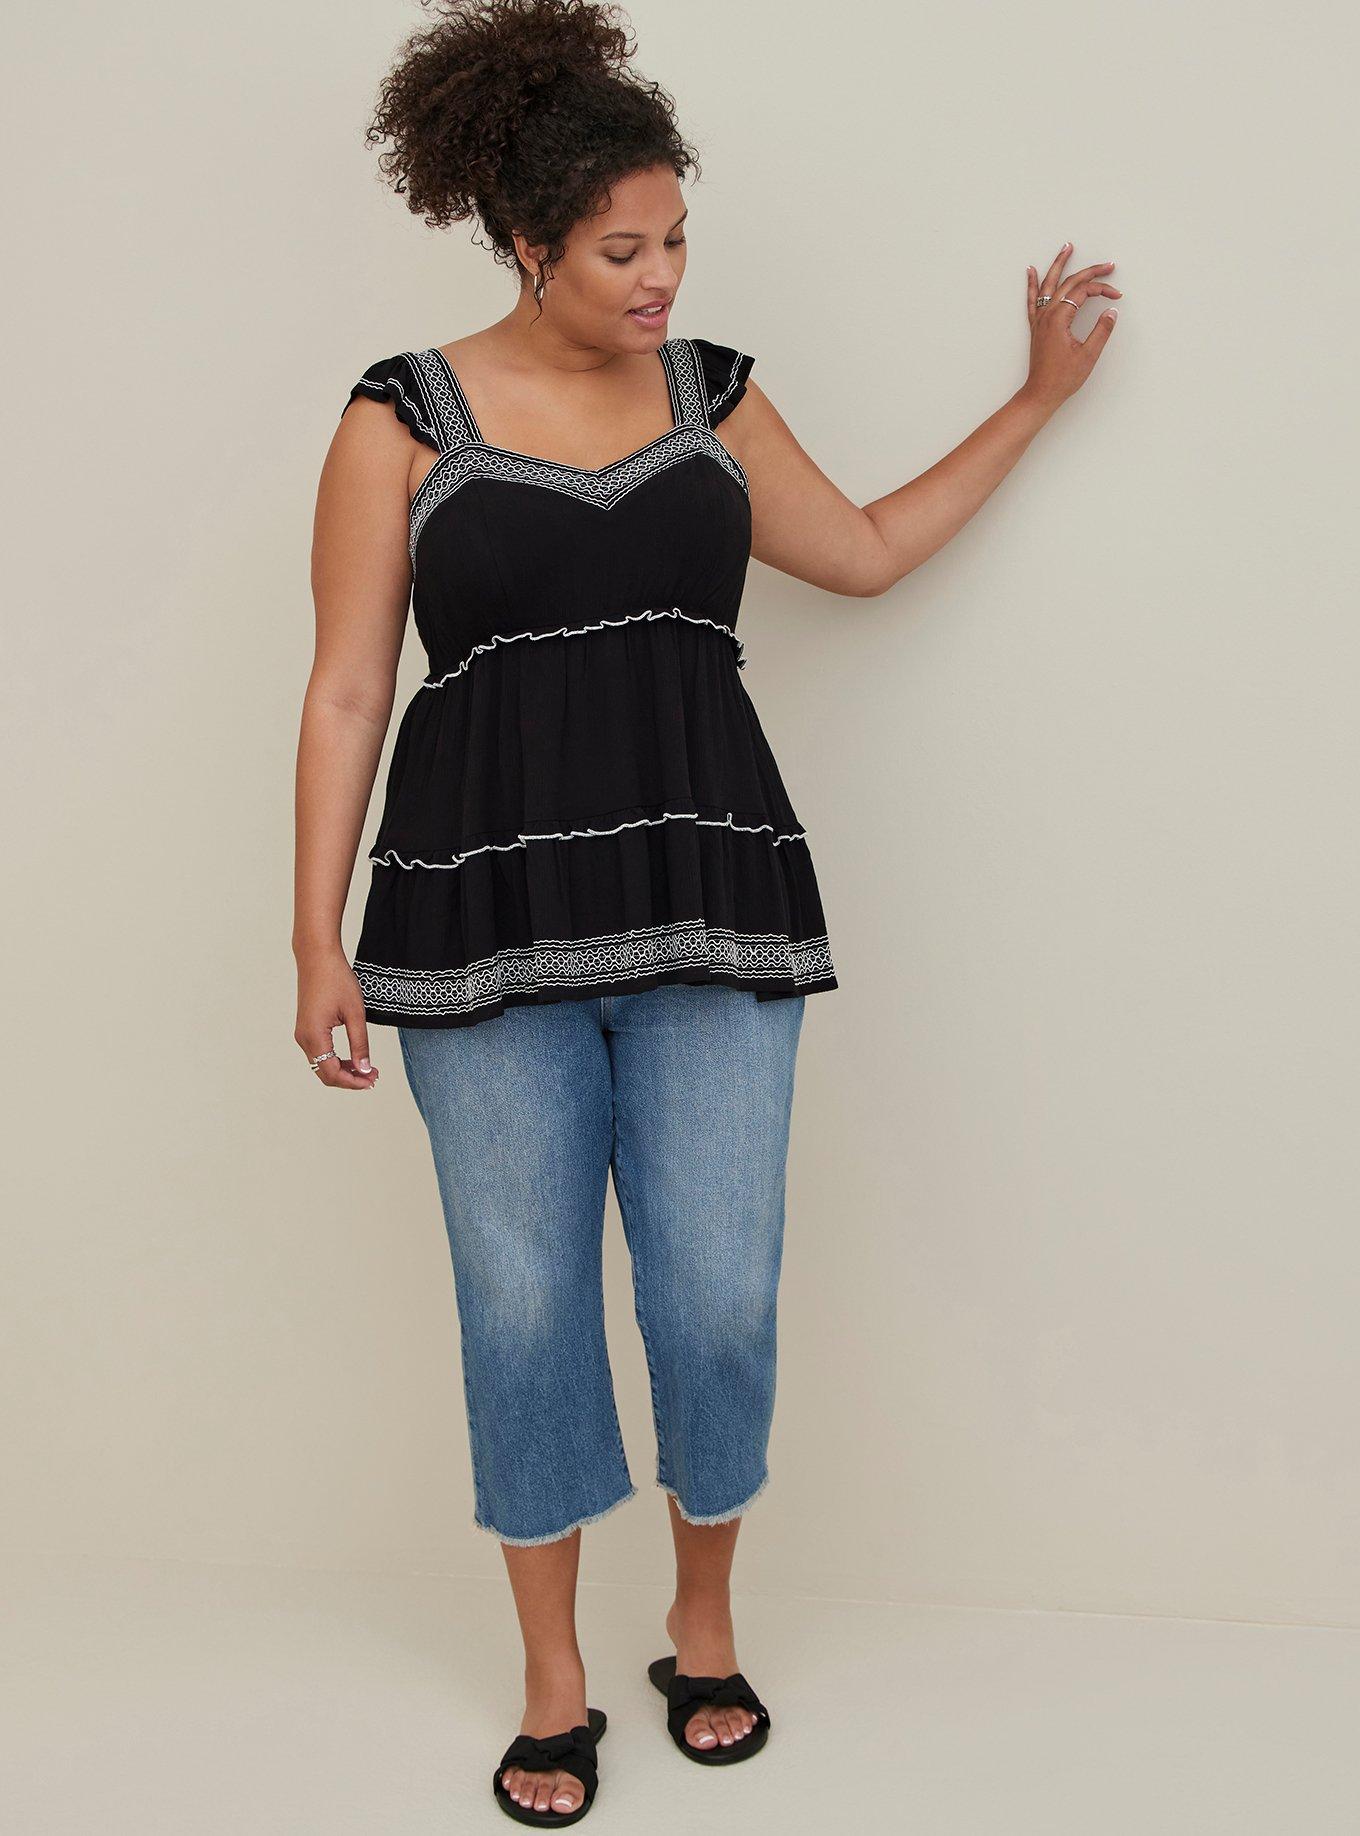 Plus Size - Crinkle Gauze Embroidered Top - Torrid